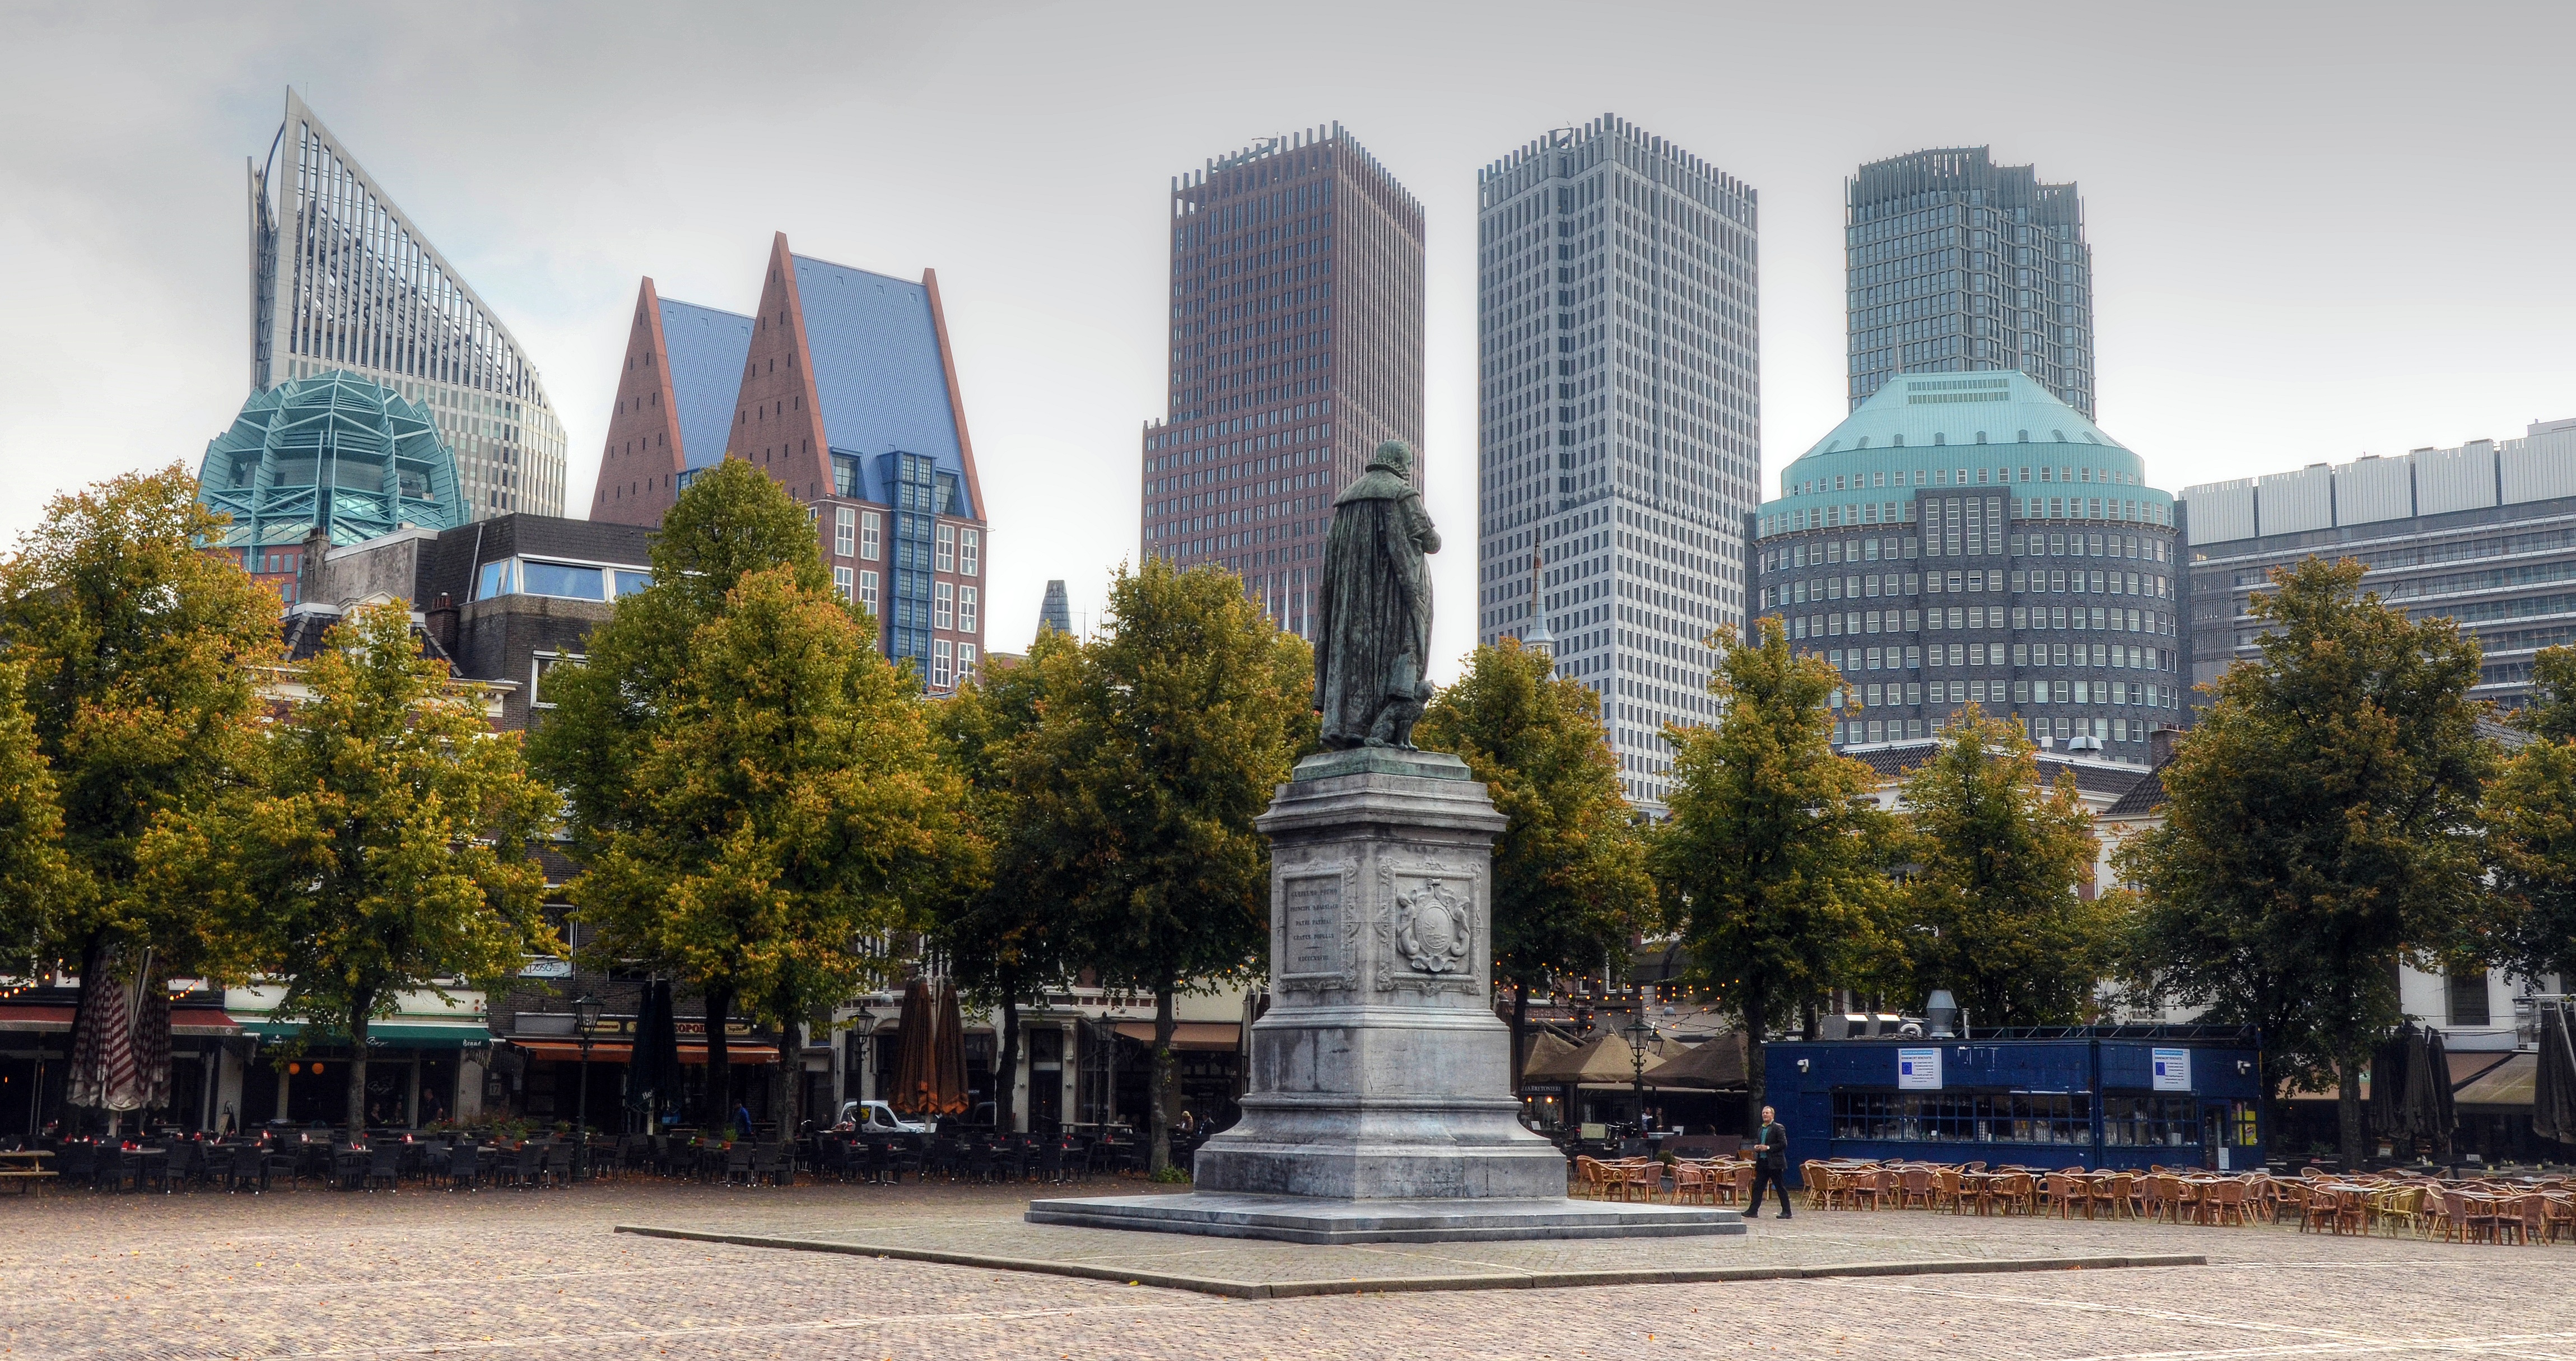 Cityscape_of_The_Hague,_viewed_from_Het_Plein_(The_Square).jpg